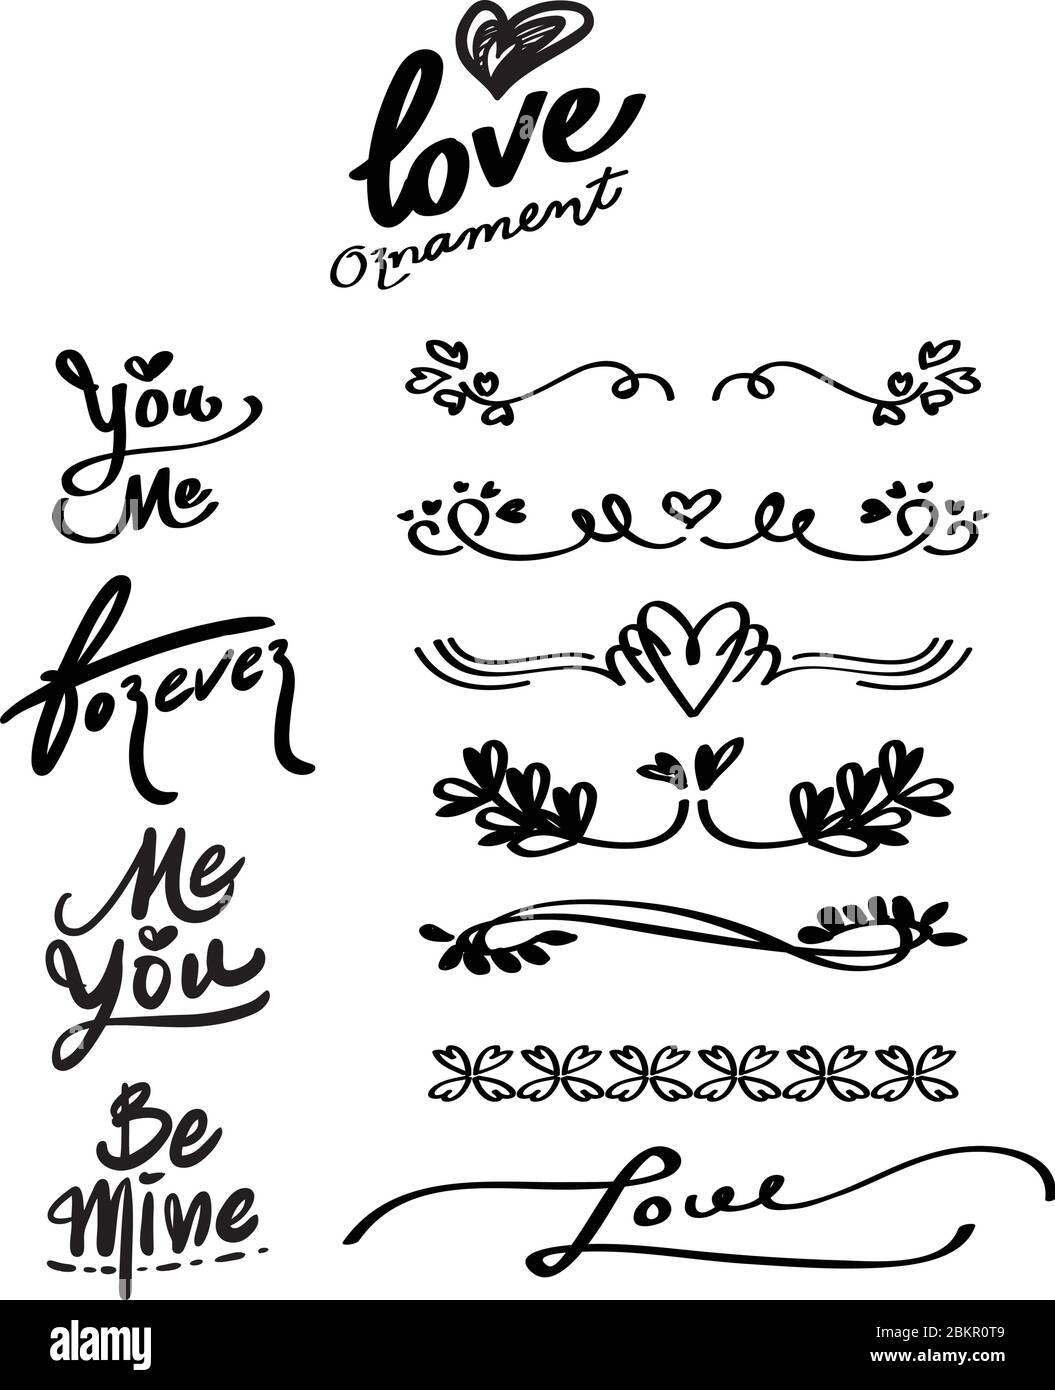 Hand draw ornament & text. For wedding, valentine, good moment, loving. Love conceptual phrase and divider. Stock Vector